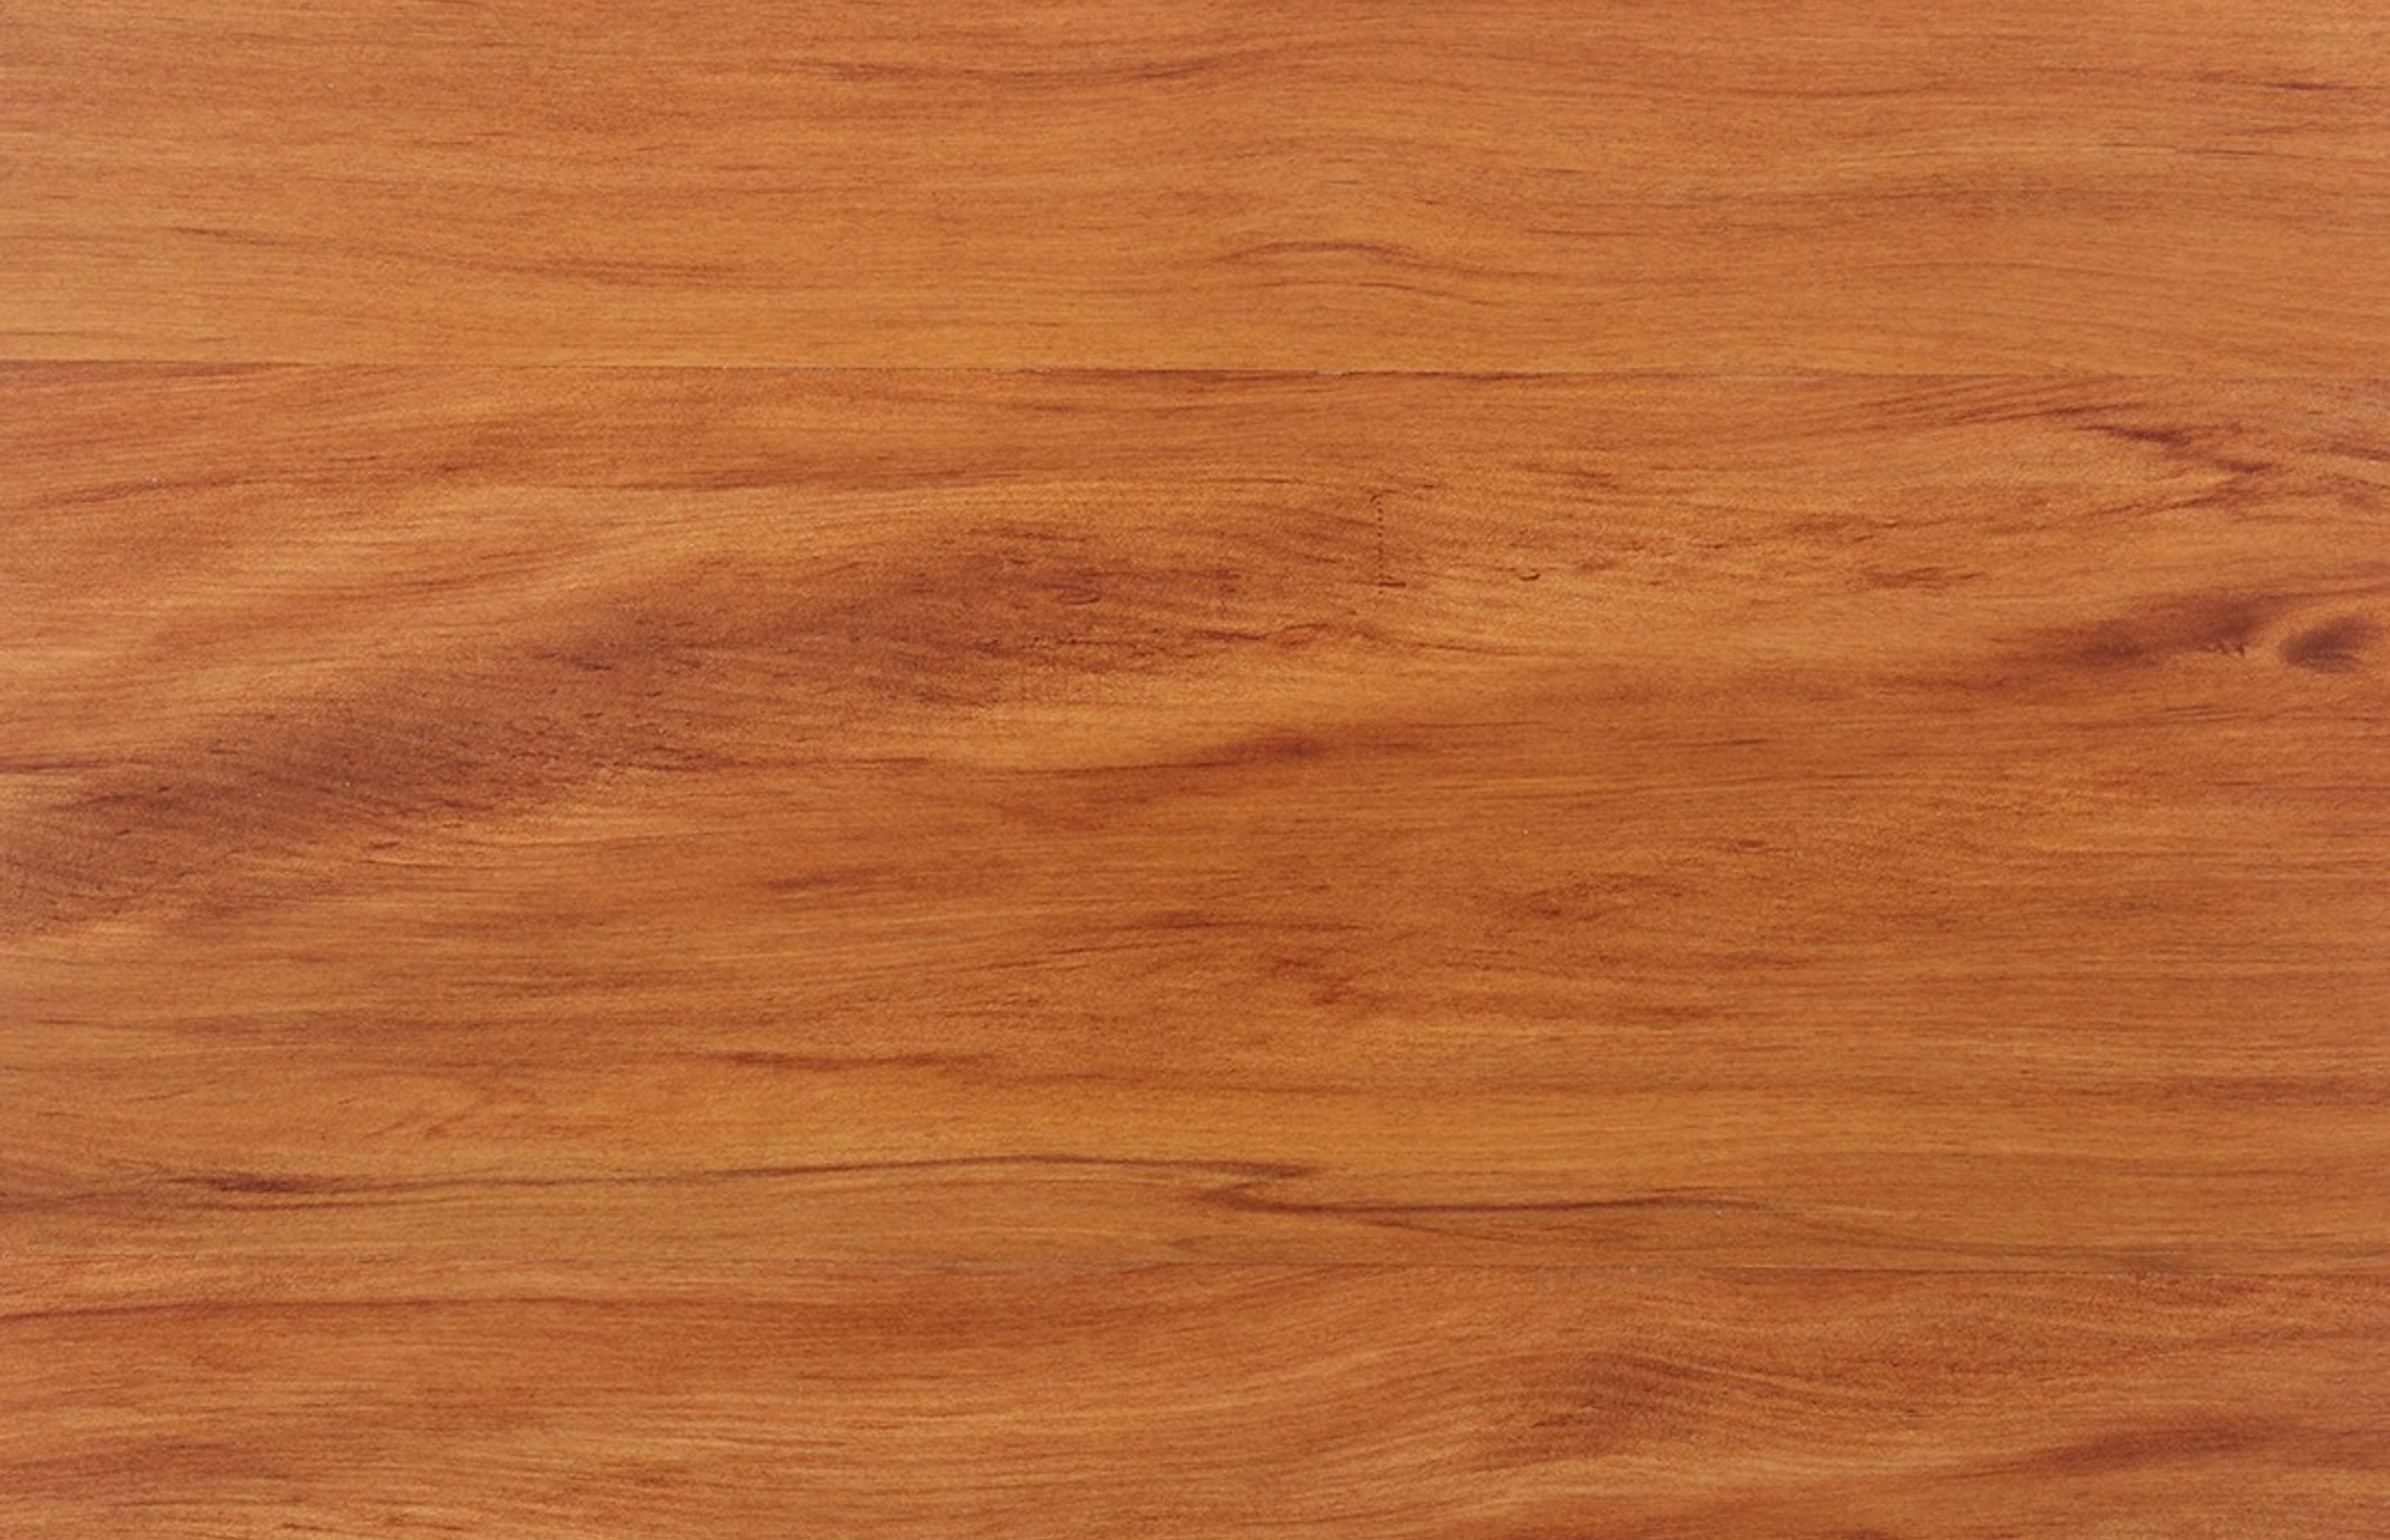 Rimu’s natural deep red colour makes it naturally beautiful but difficult to colour